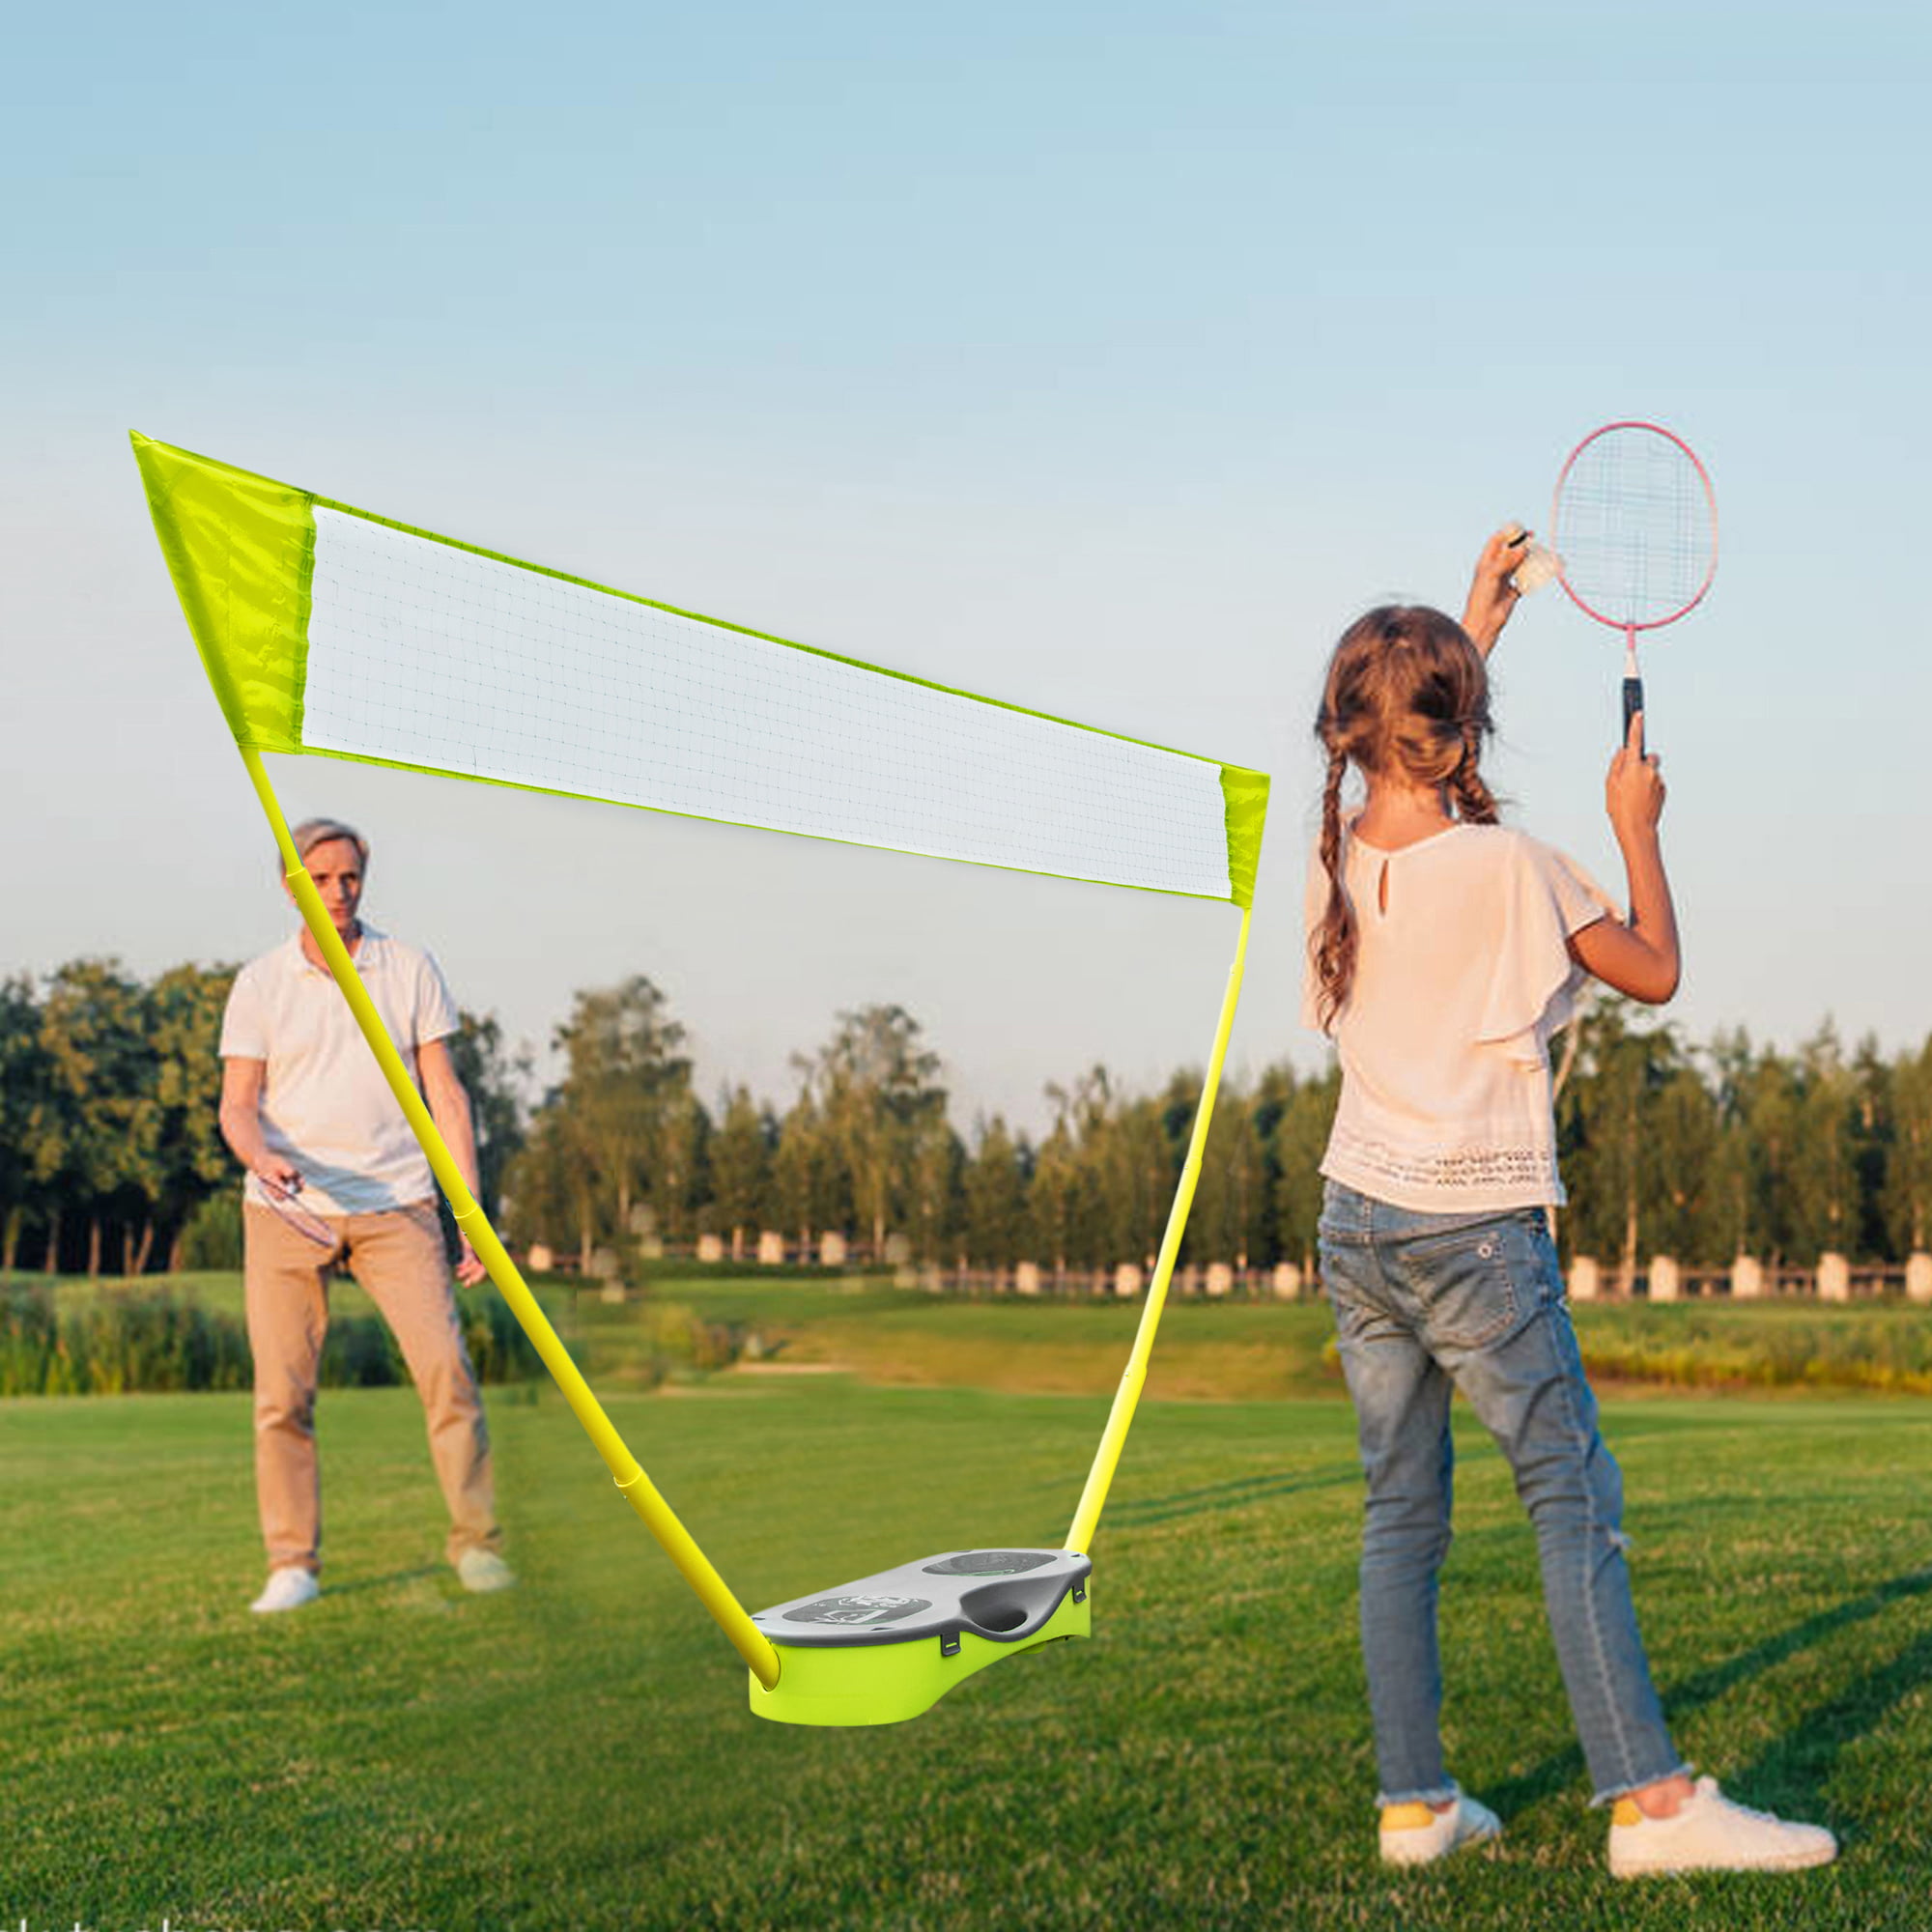 Foldable & Portable fun Family Entertainment International Standard Height 1.55m Samule Stand Frame Badminton Volleyball Net 